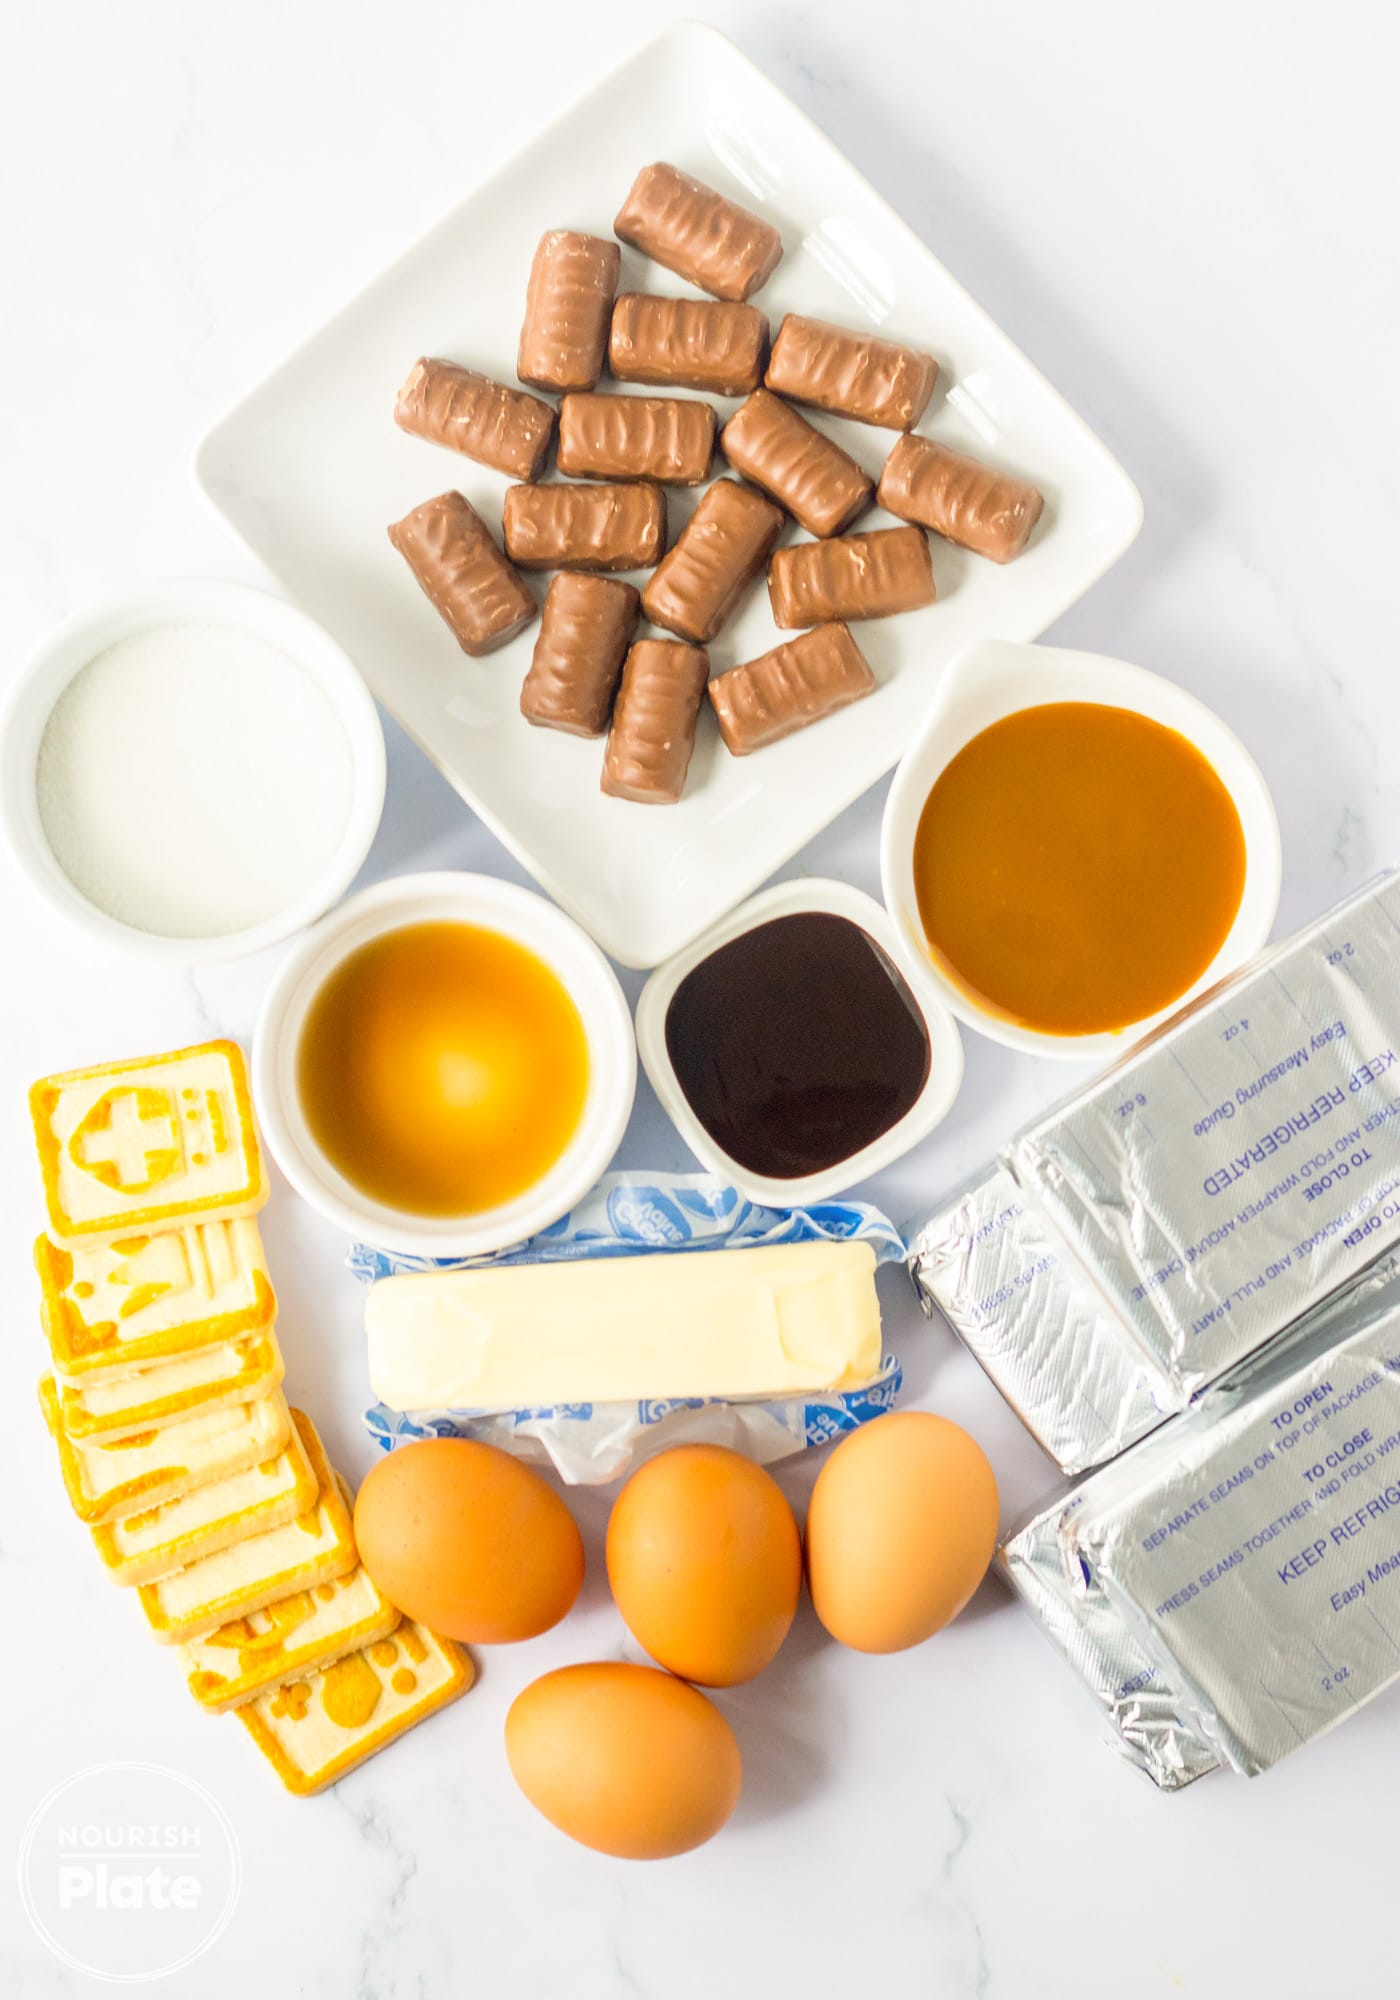 Ingredients needed to make a Twix cheesecake